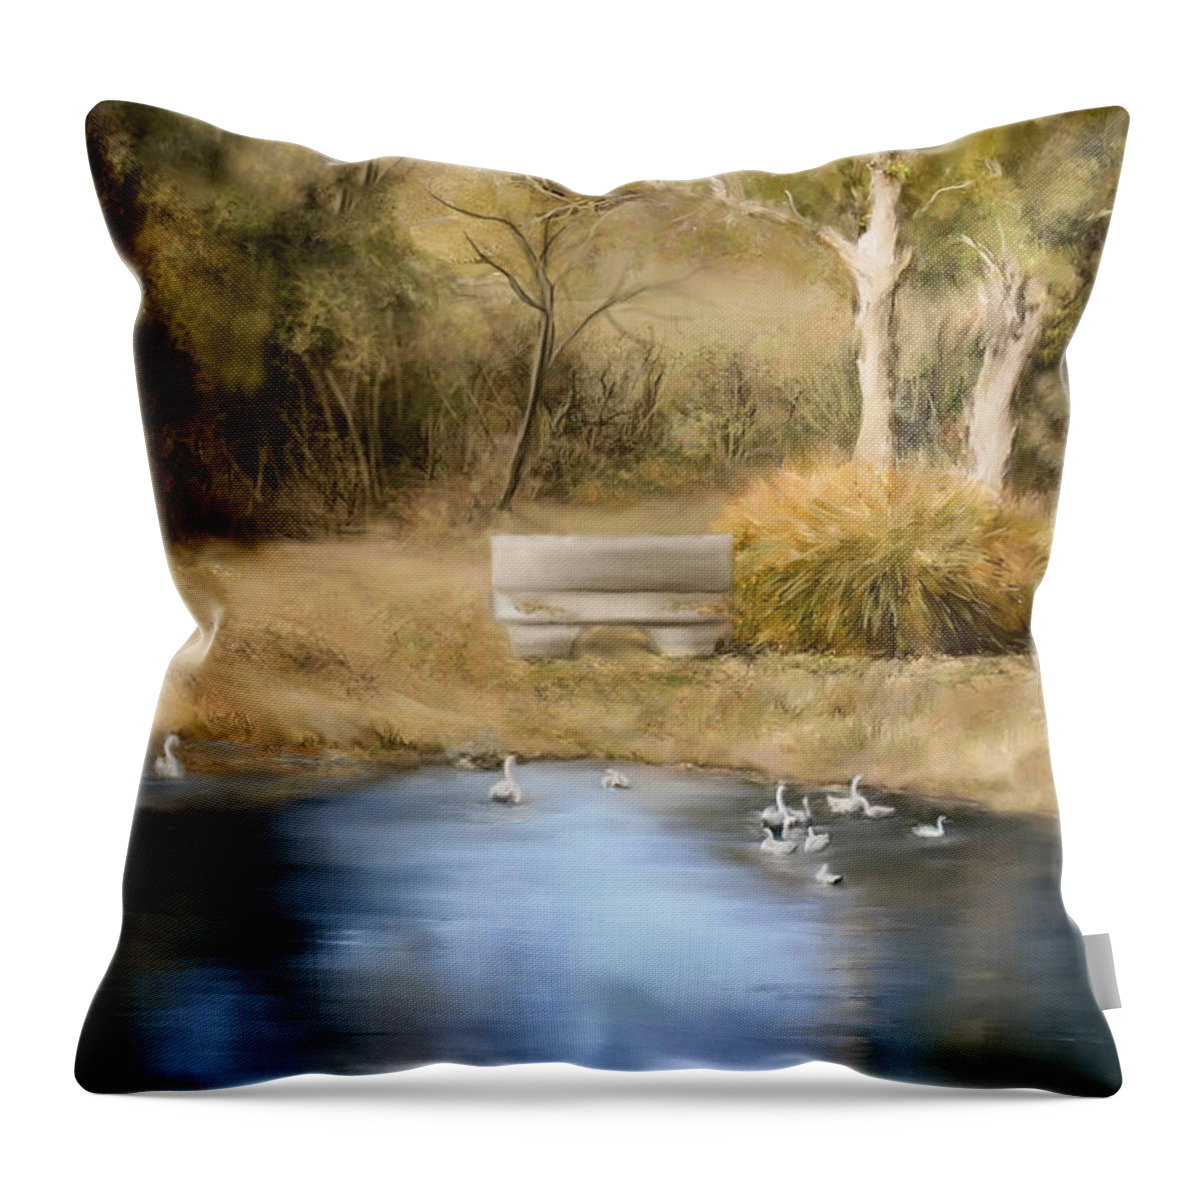 Ducks Throw Pillow featuring the painting The pond by Bonnie Willis